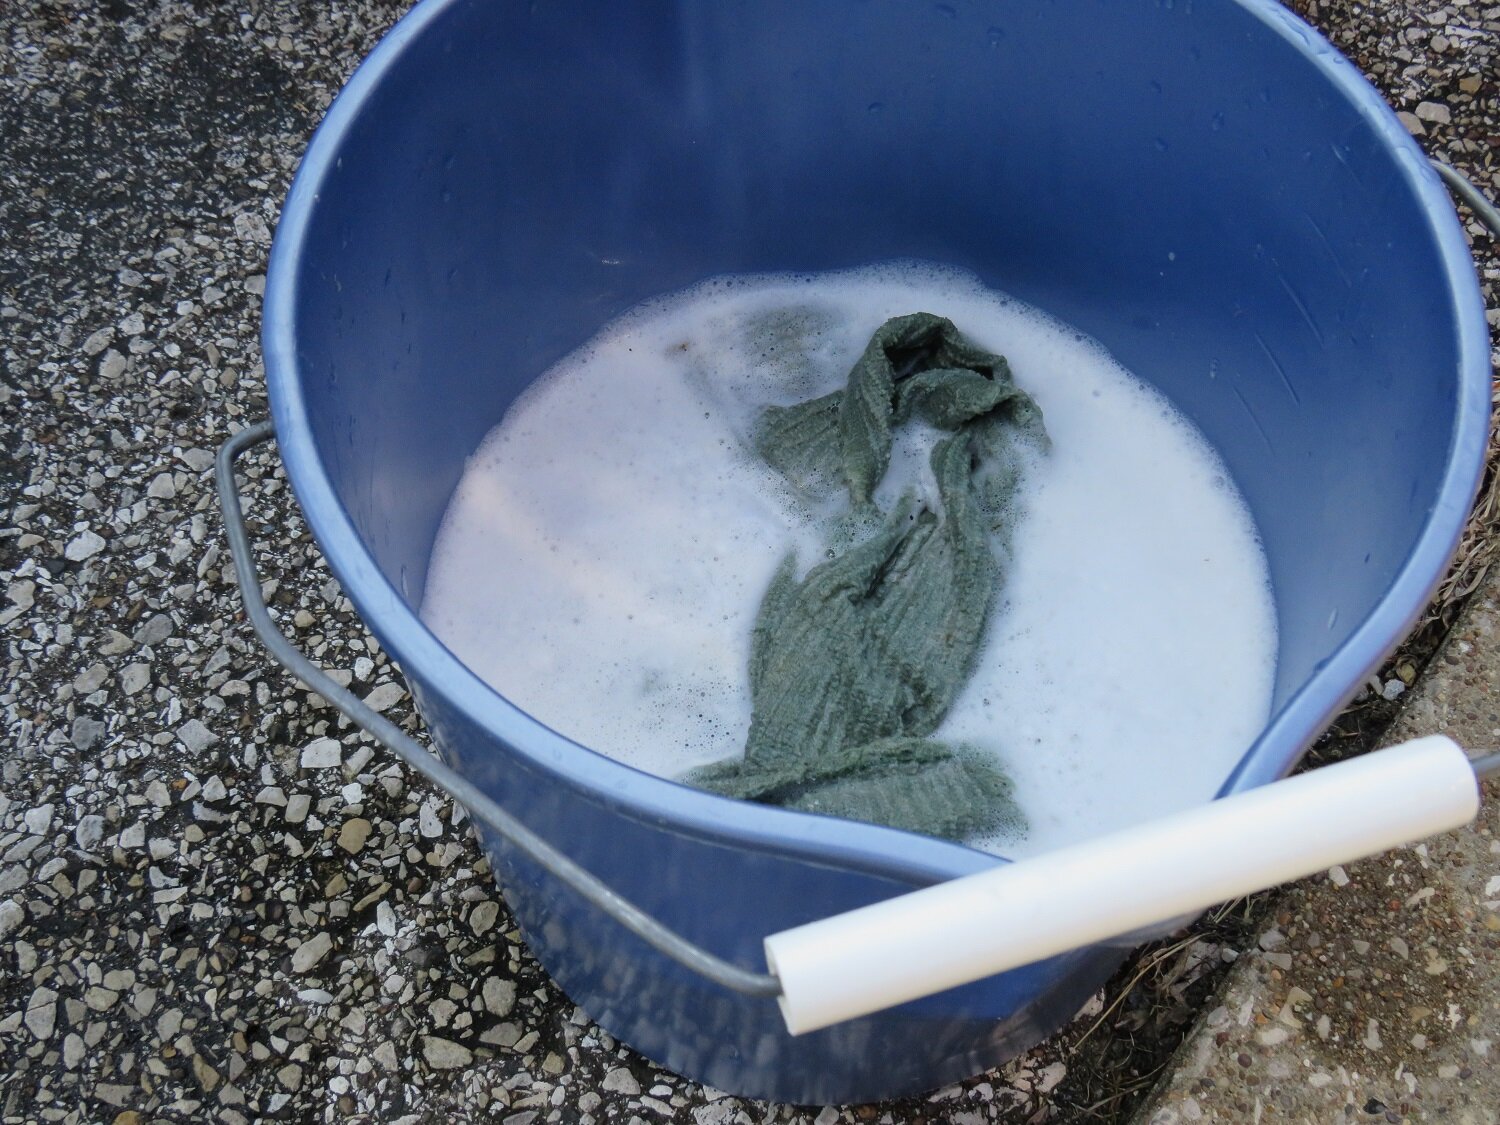  Buckets and bubbles and wash-rags, oh my! 